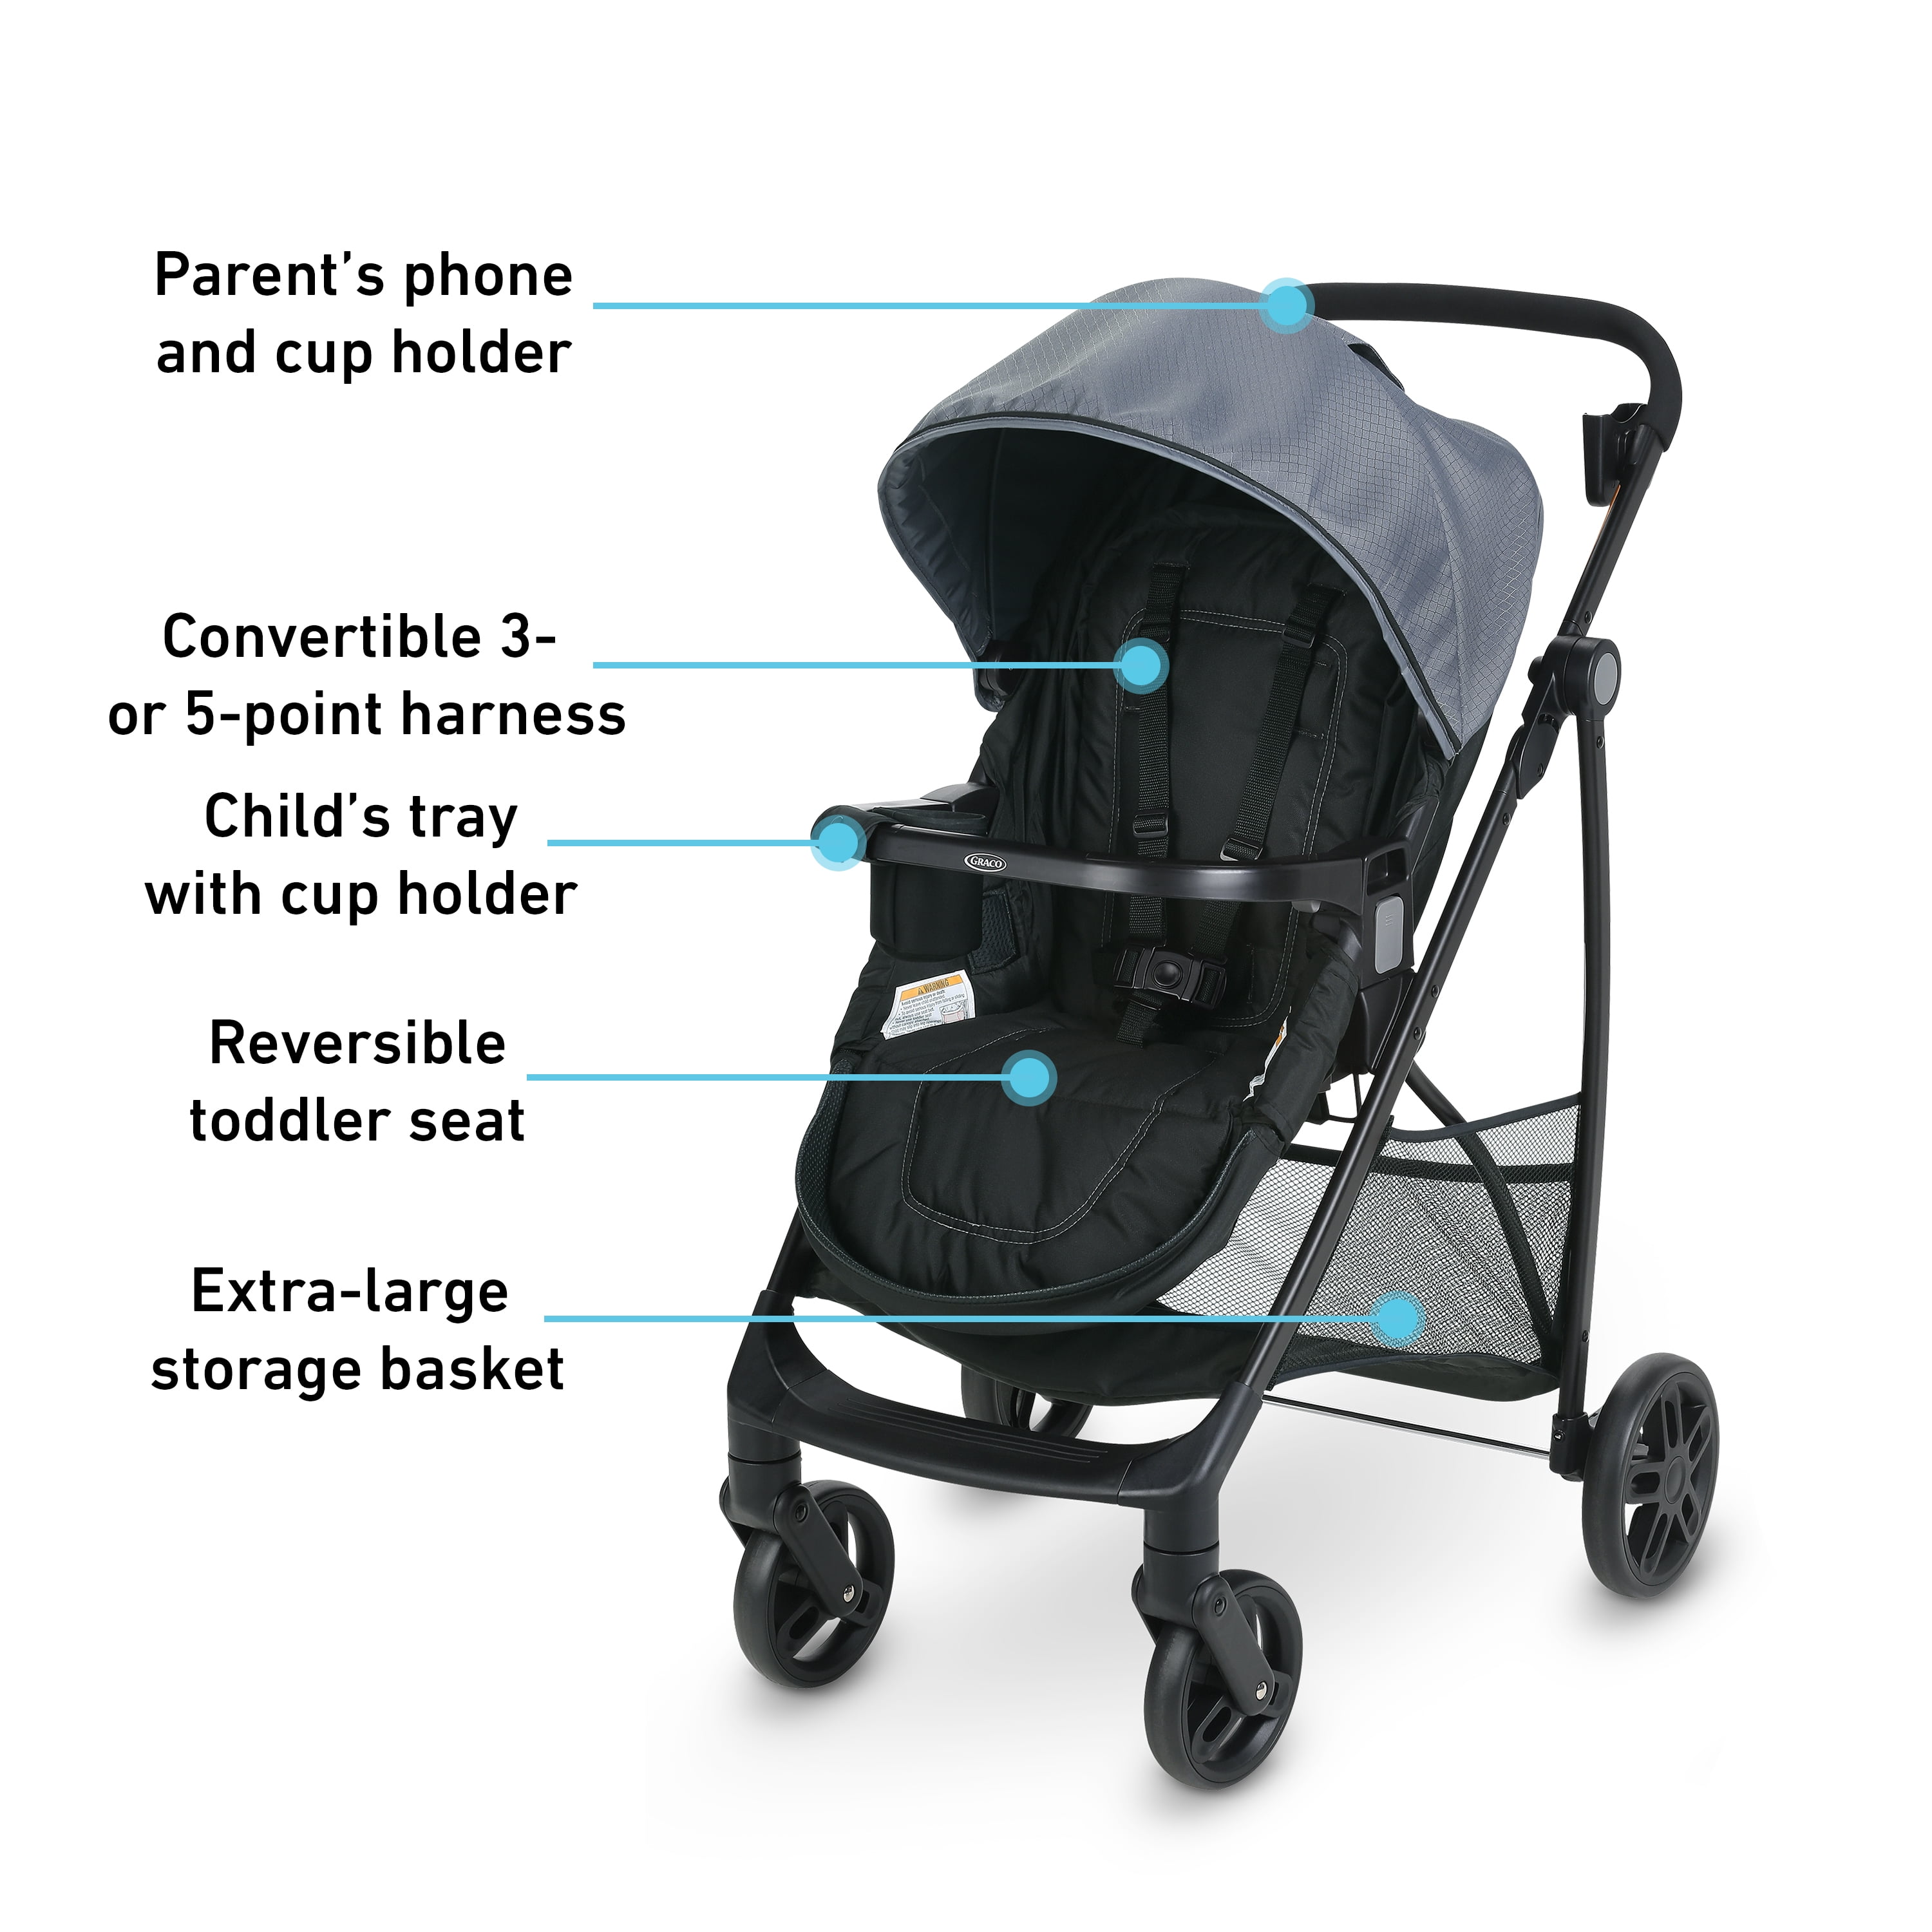 graco modes essentials travel system with snugride 30 walmart